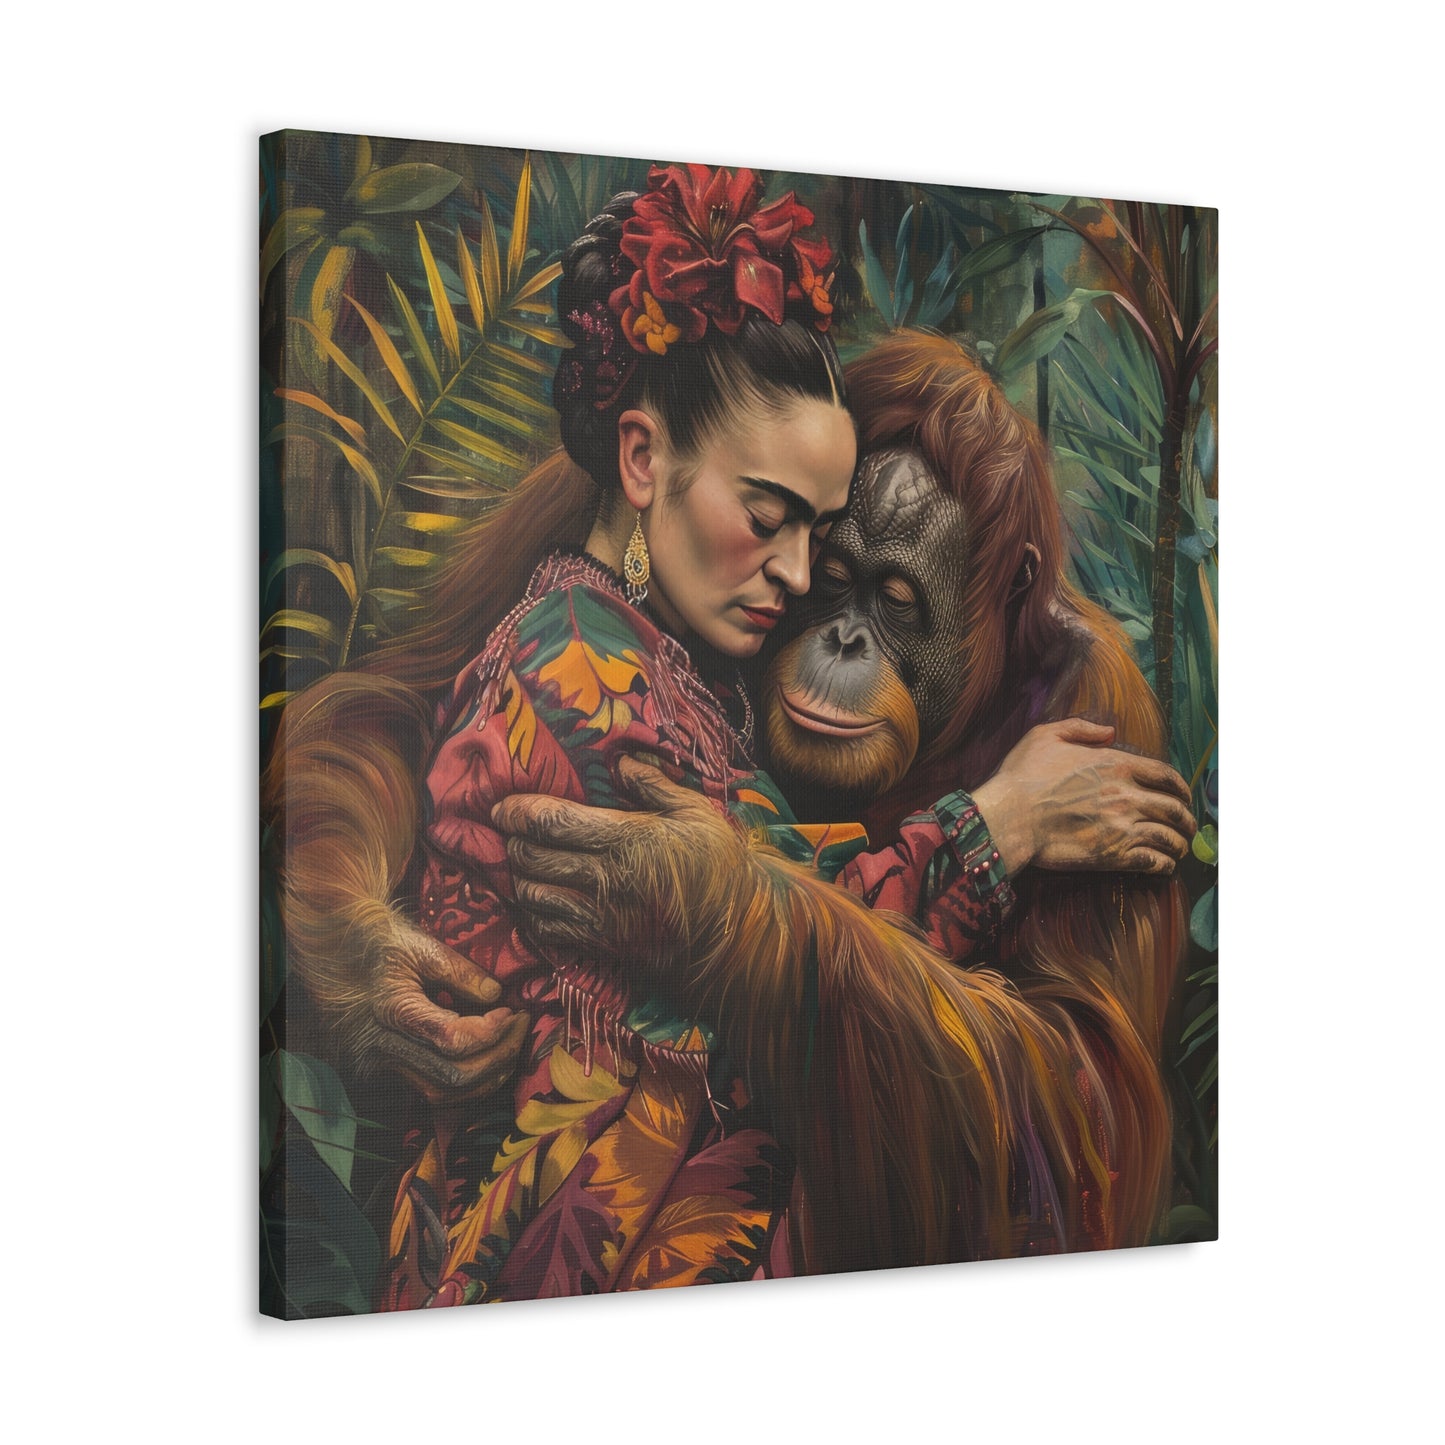 A David Miller Embrace of the Wild exclusive canvas print of Frida Kahlo's artwork portraying a woman embracing an orangutan amidst tropical foliage, sold by Printify.